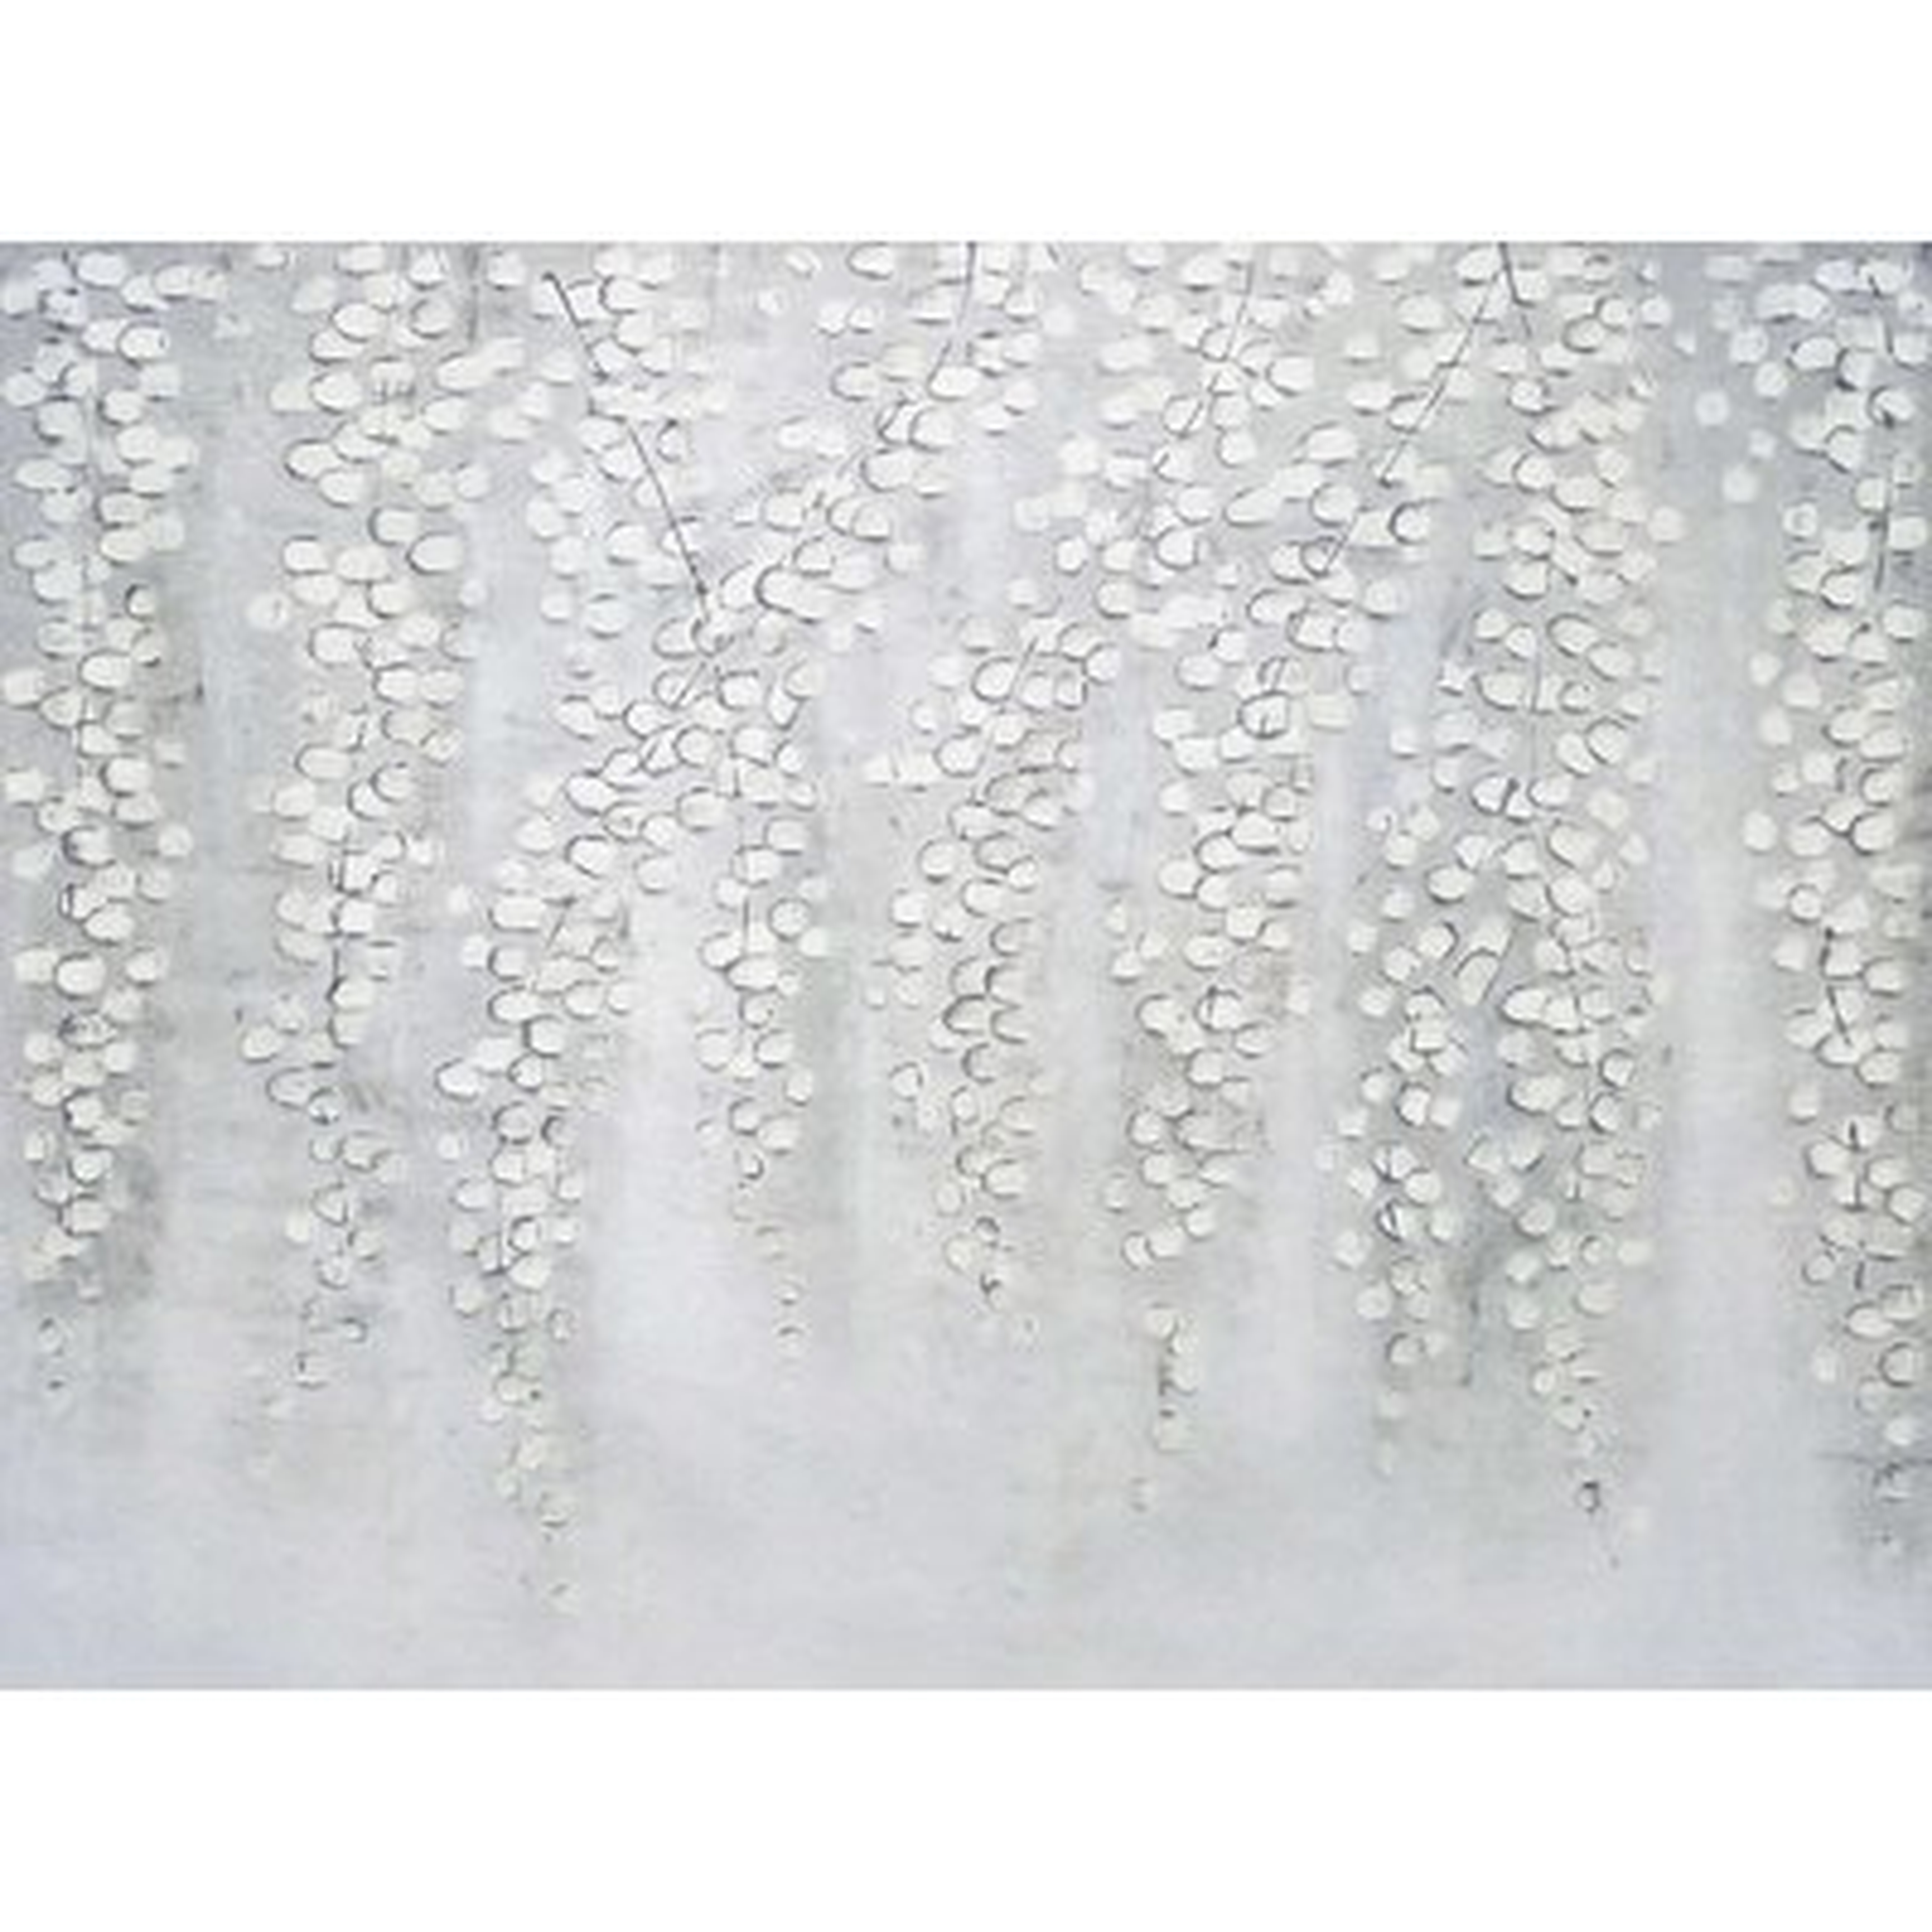 Leaves' Oil Painting Print on Wrapped Canvas in White - Wayfair